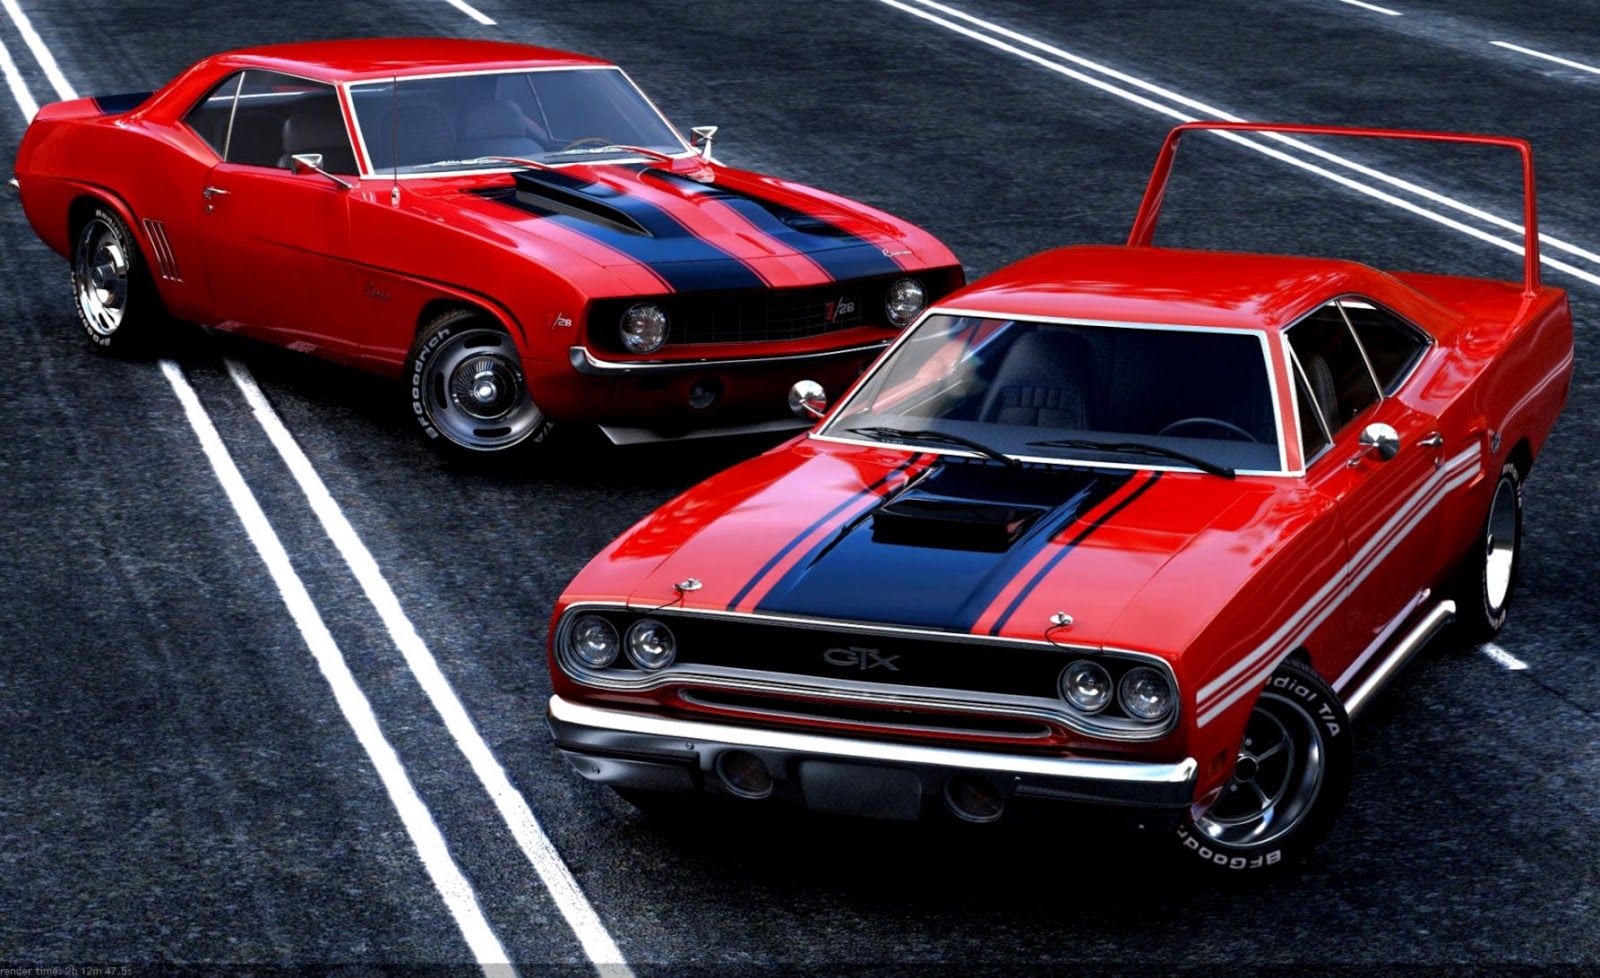 Cool Muscle Cars Wallpapers